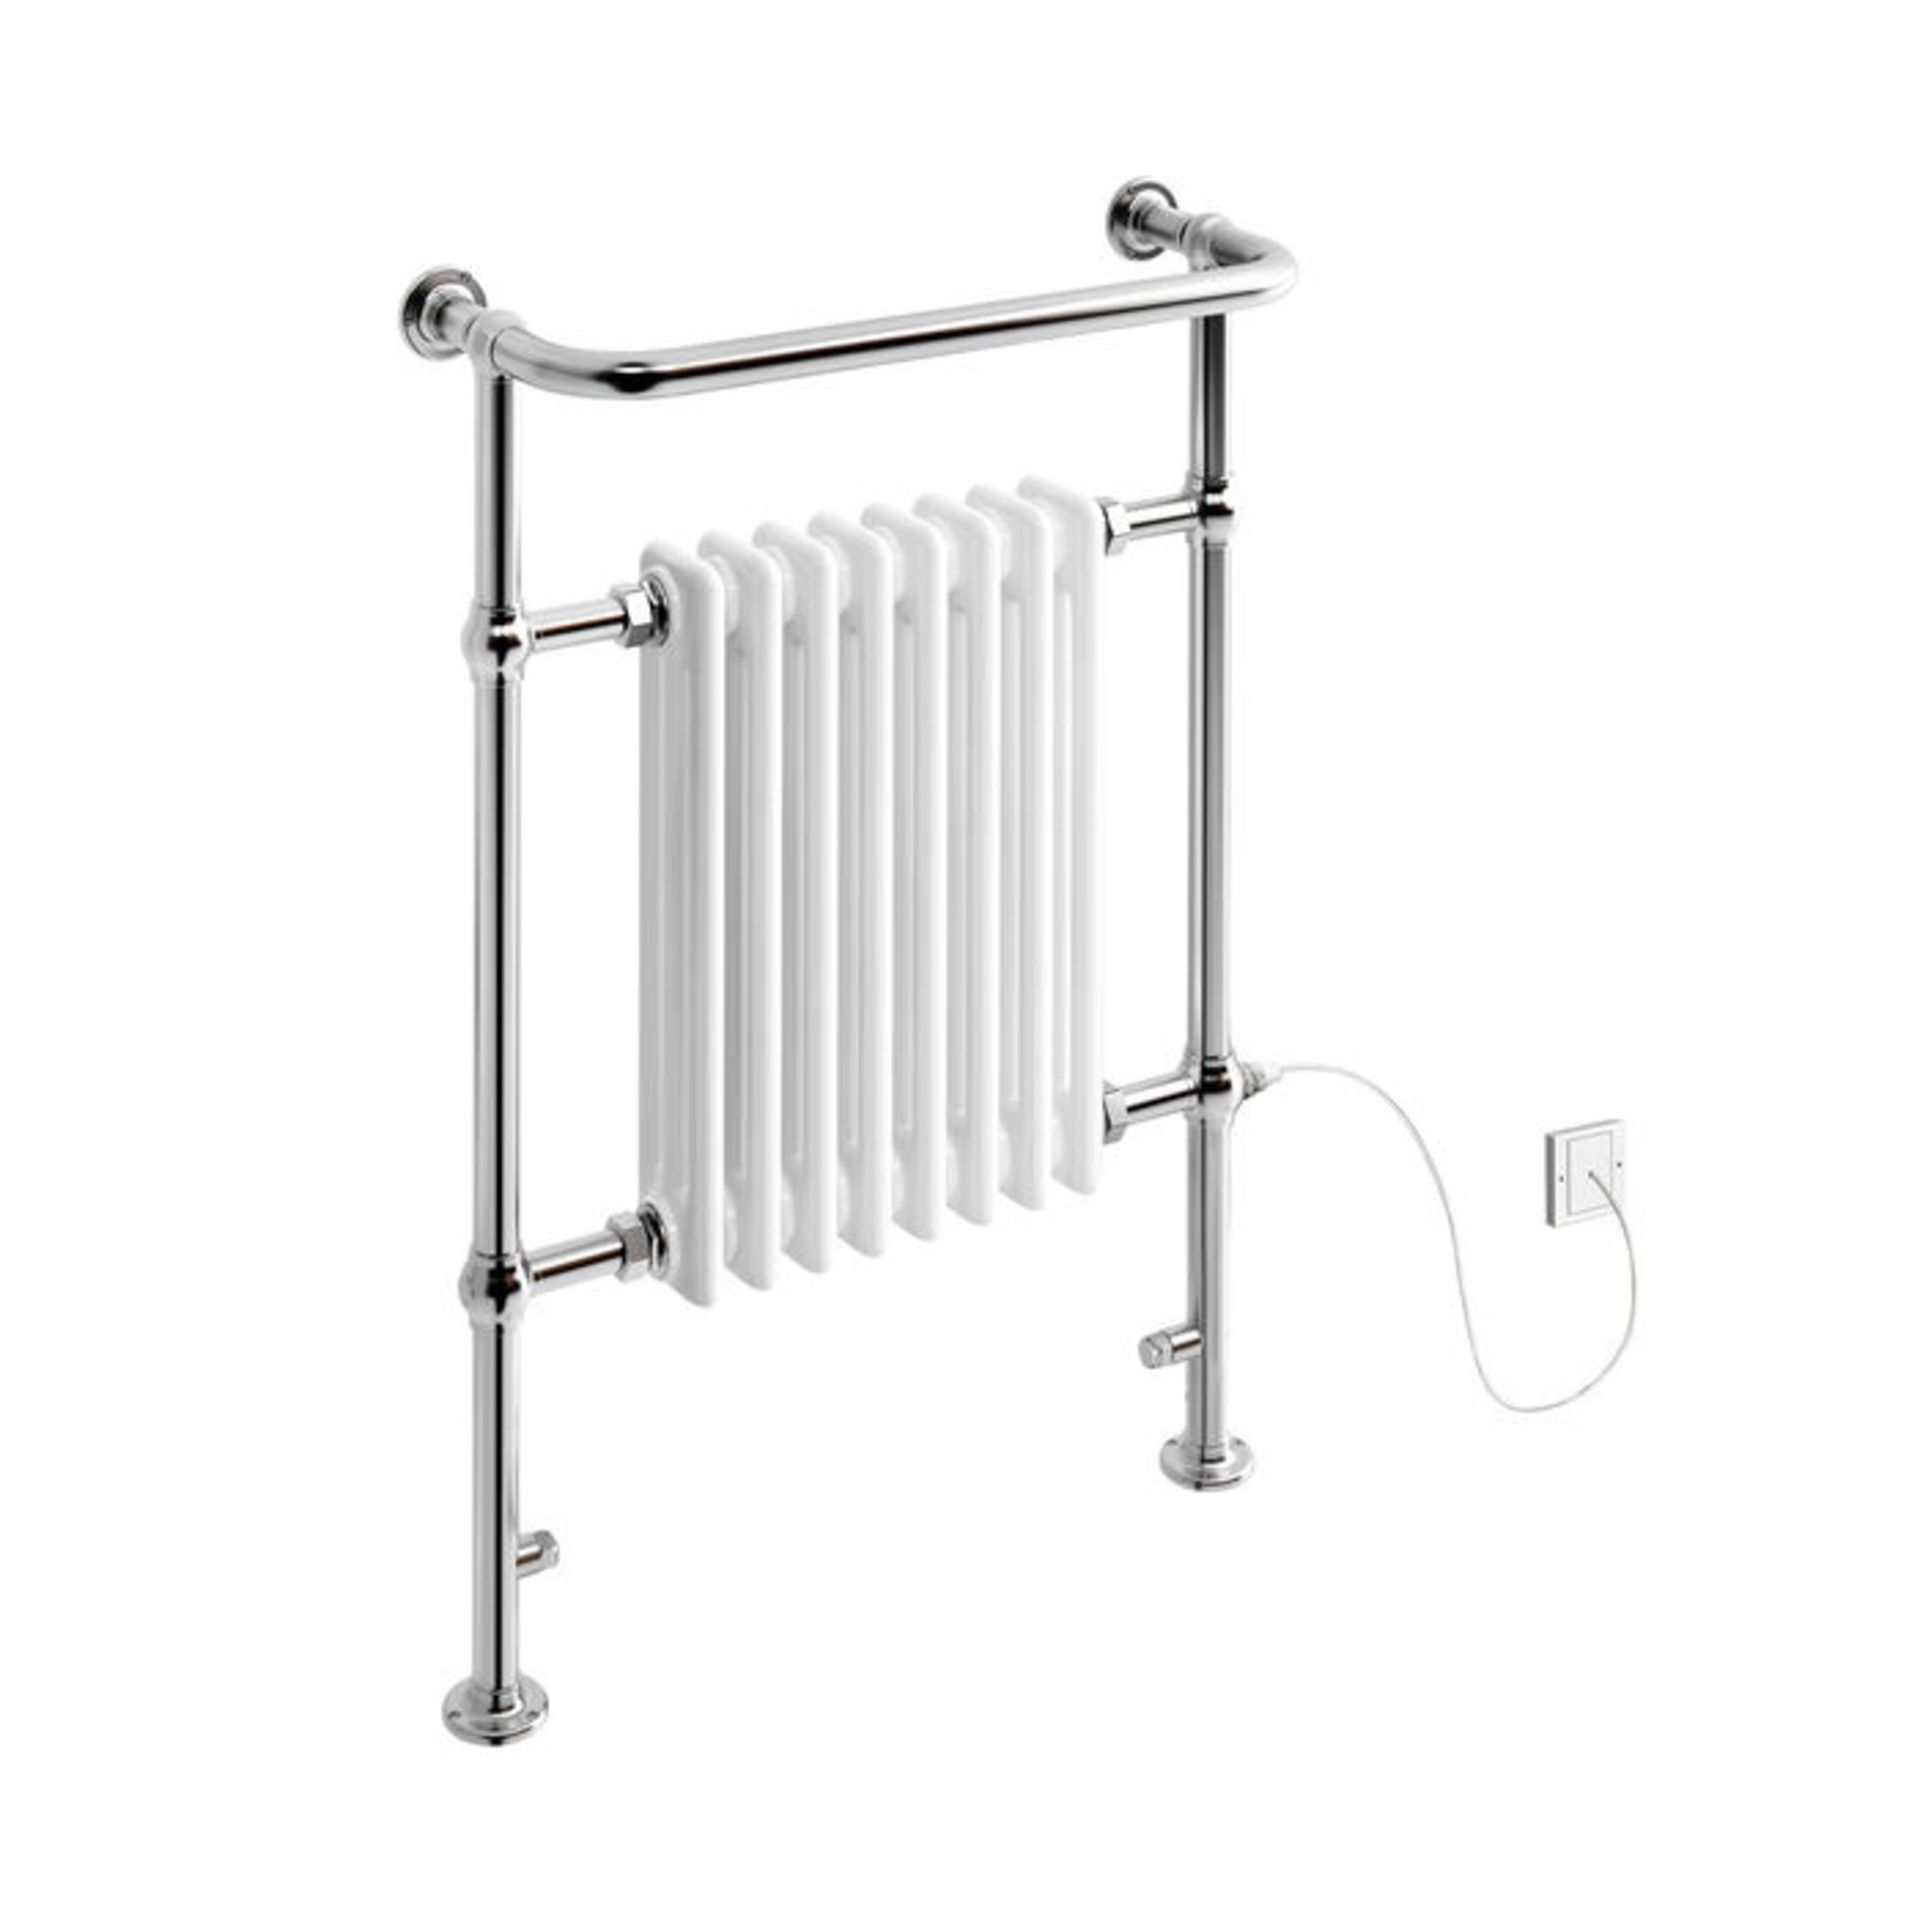 (G17) 952x659mm Large Electric Traditional Wall Mounted Rail Radiator- Cambridge. RRP £359.99.... - Image 3 of 3